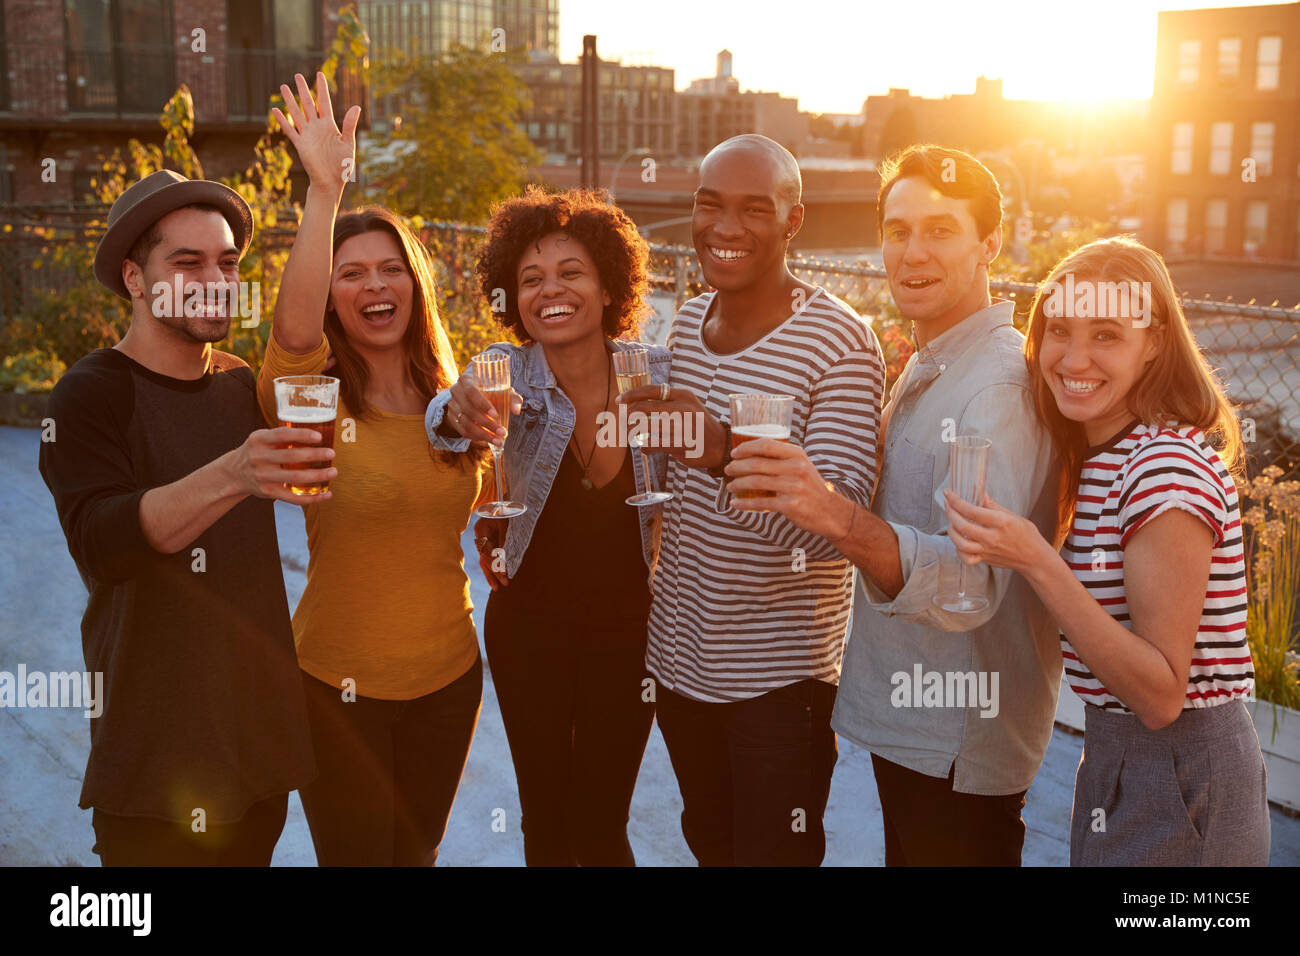 Friends at a rooftop party in raising glasses to camera Stock Photo